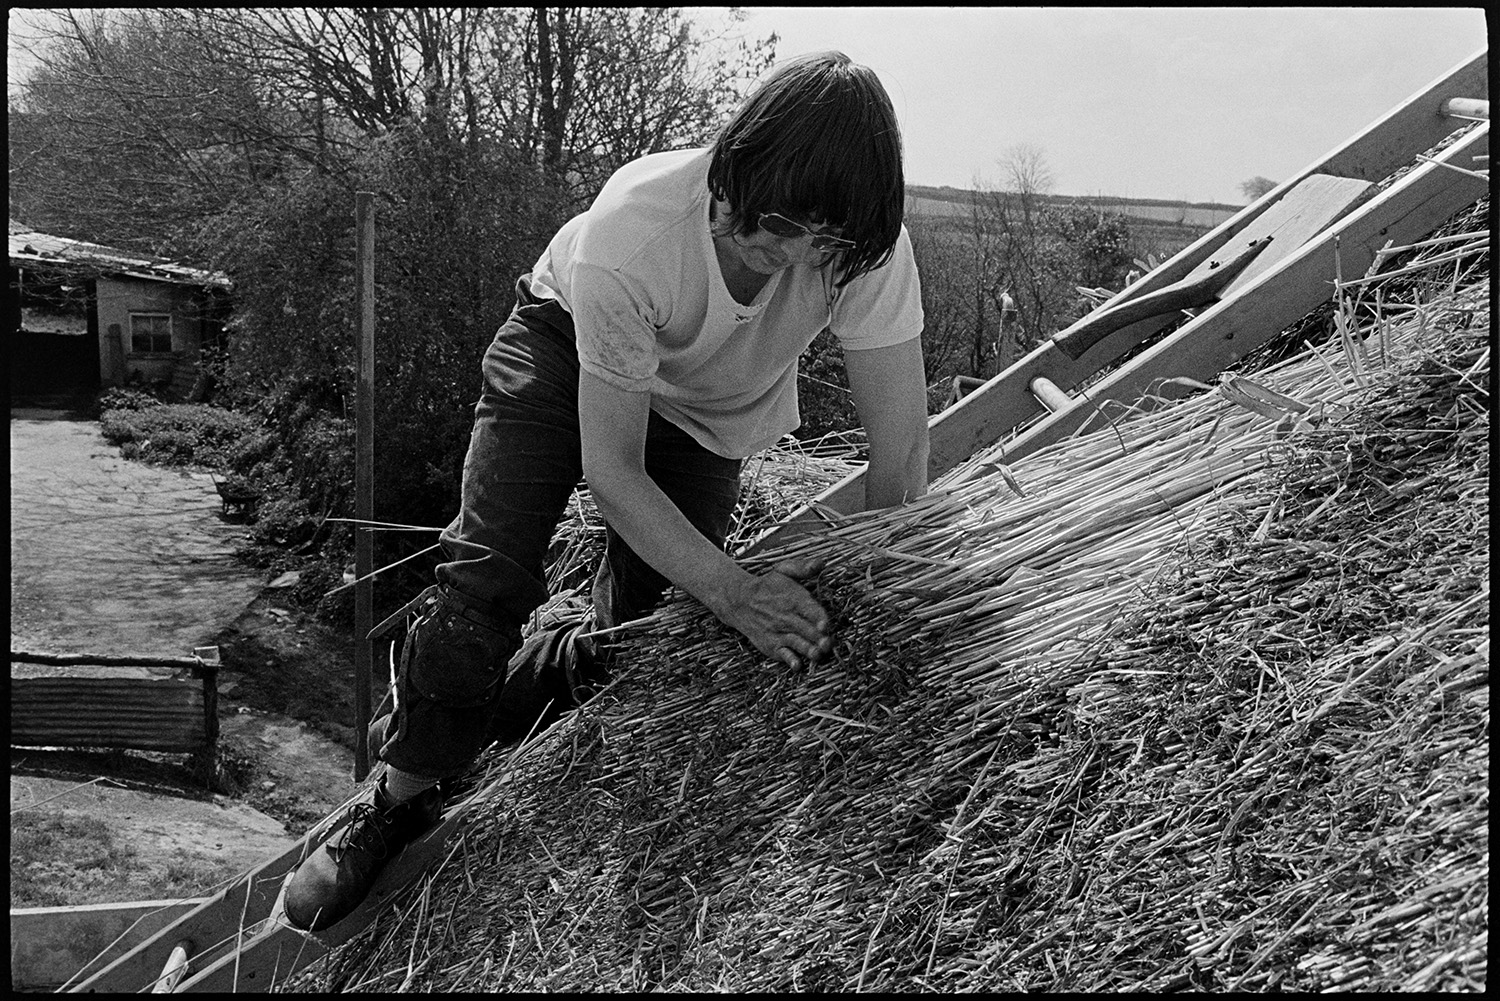 Thatcher at work on roof. 
[Nigel Gard thatching a roof at Woodtown, Dolton. He is up a ladder on the roof and pushing the reed to make it smooth. A paddle is resting on the ladder.]